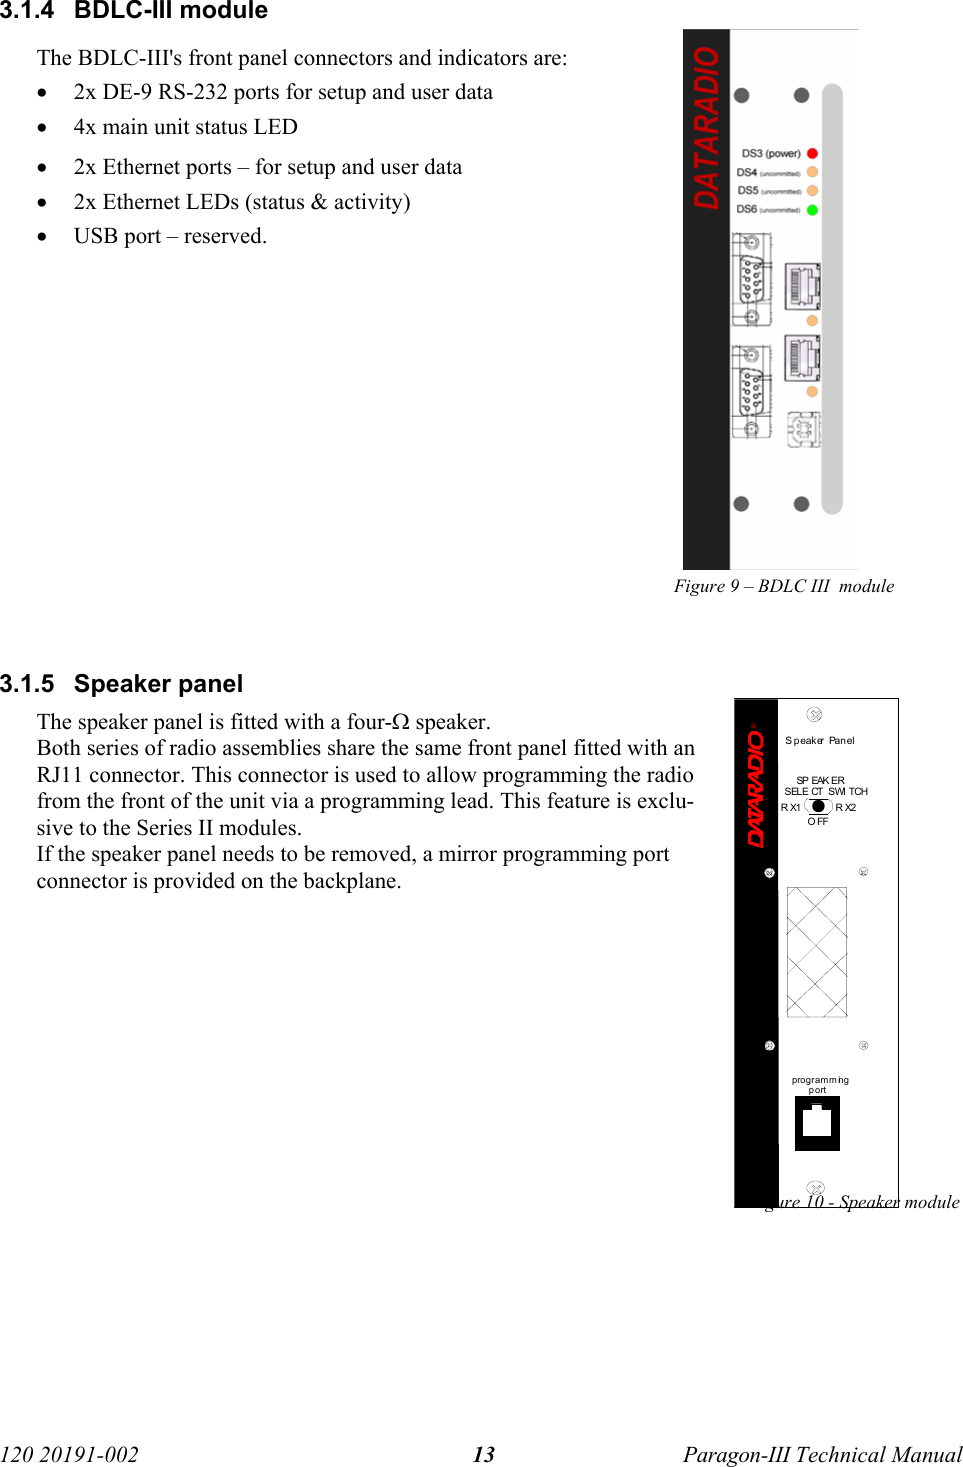   120 20191-002  Paragon-III Technical Manual 133.1.4 BDLC-III module The BDLC-III&apos;s front panel connectors and indicators are: • 2x DE-9 RS-232 ports for setup and user data • 4x main unit status LED • 2x Ethernet ports – for setup and user data • 2x Ethernet LEDs (status &amp; activity)  • USB port – reserved.             Figure 9 – BDLC III  module   3.1.5 Speaker panel The speaker panel is fitted with a four-Ω speaker.  Both series of radio assemblies share the same front panel fitted with an RJ11 connector. This connector is used to allow programming the radio from the front of the unit via a programming lead. This feature is exclu-sive to the Series II modules.  If the speaker panel needs to be removed, a mirror programming port connector is provided on the backplane.            Figure 10 - Speaker module      ®Speaker Panelprogramm ingportRX2RX1OFFSP EAK ERSELE CT  SWI TCH